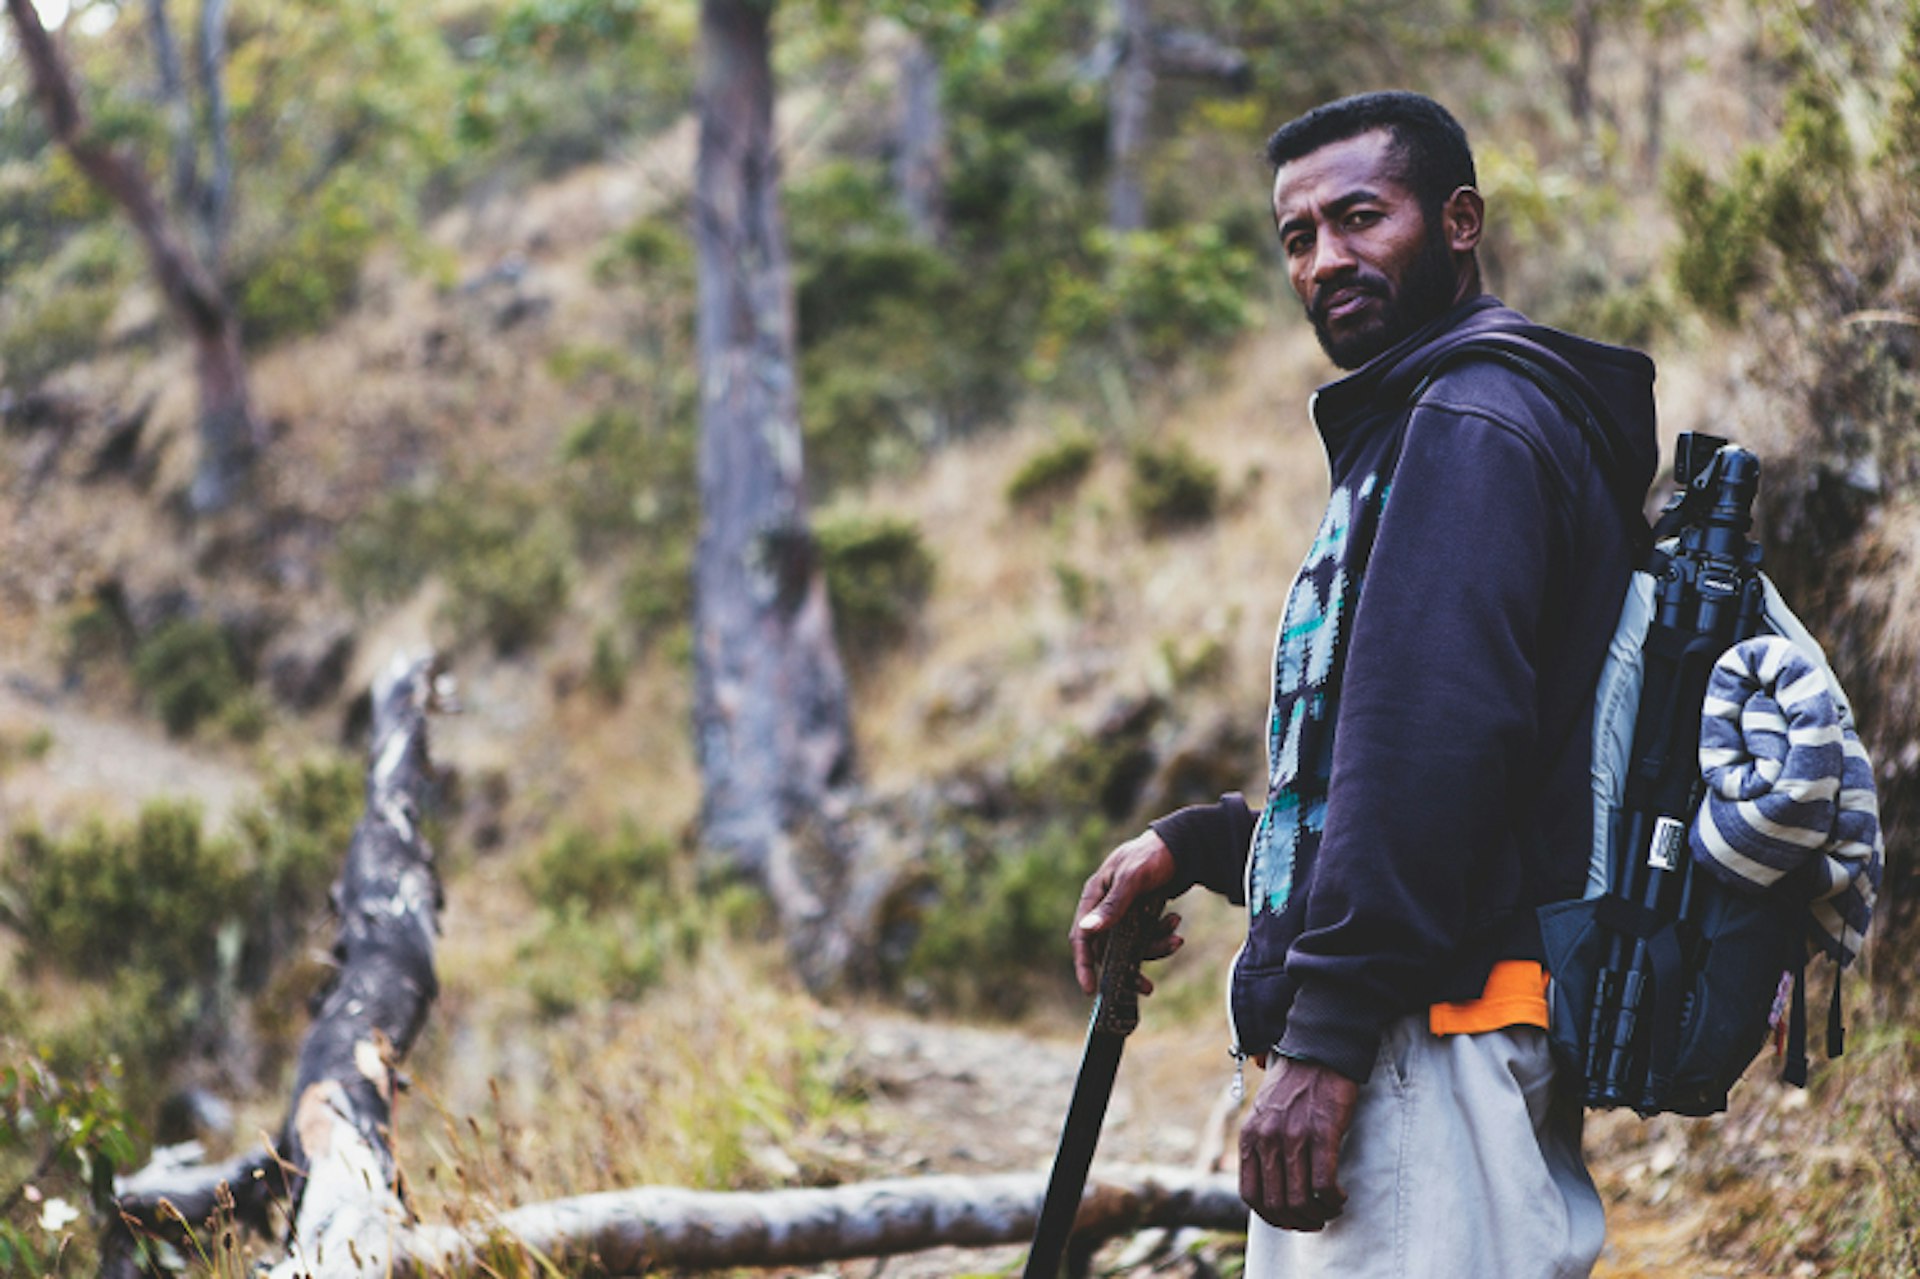 Mountain guide, Mt Ramelou, Timor-Leste. Image by Brian Oh